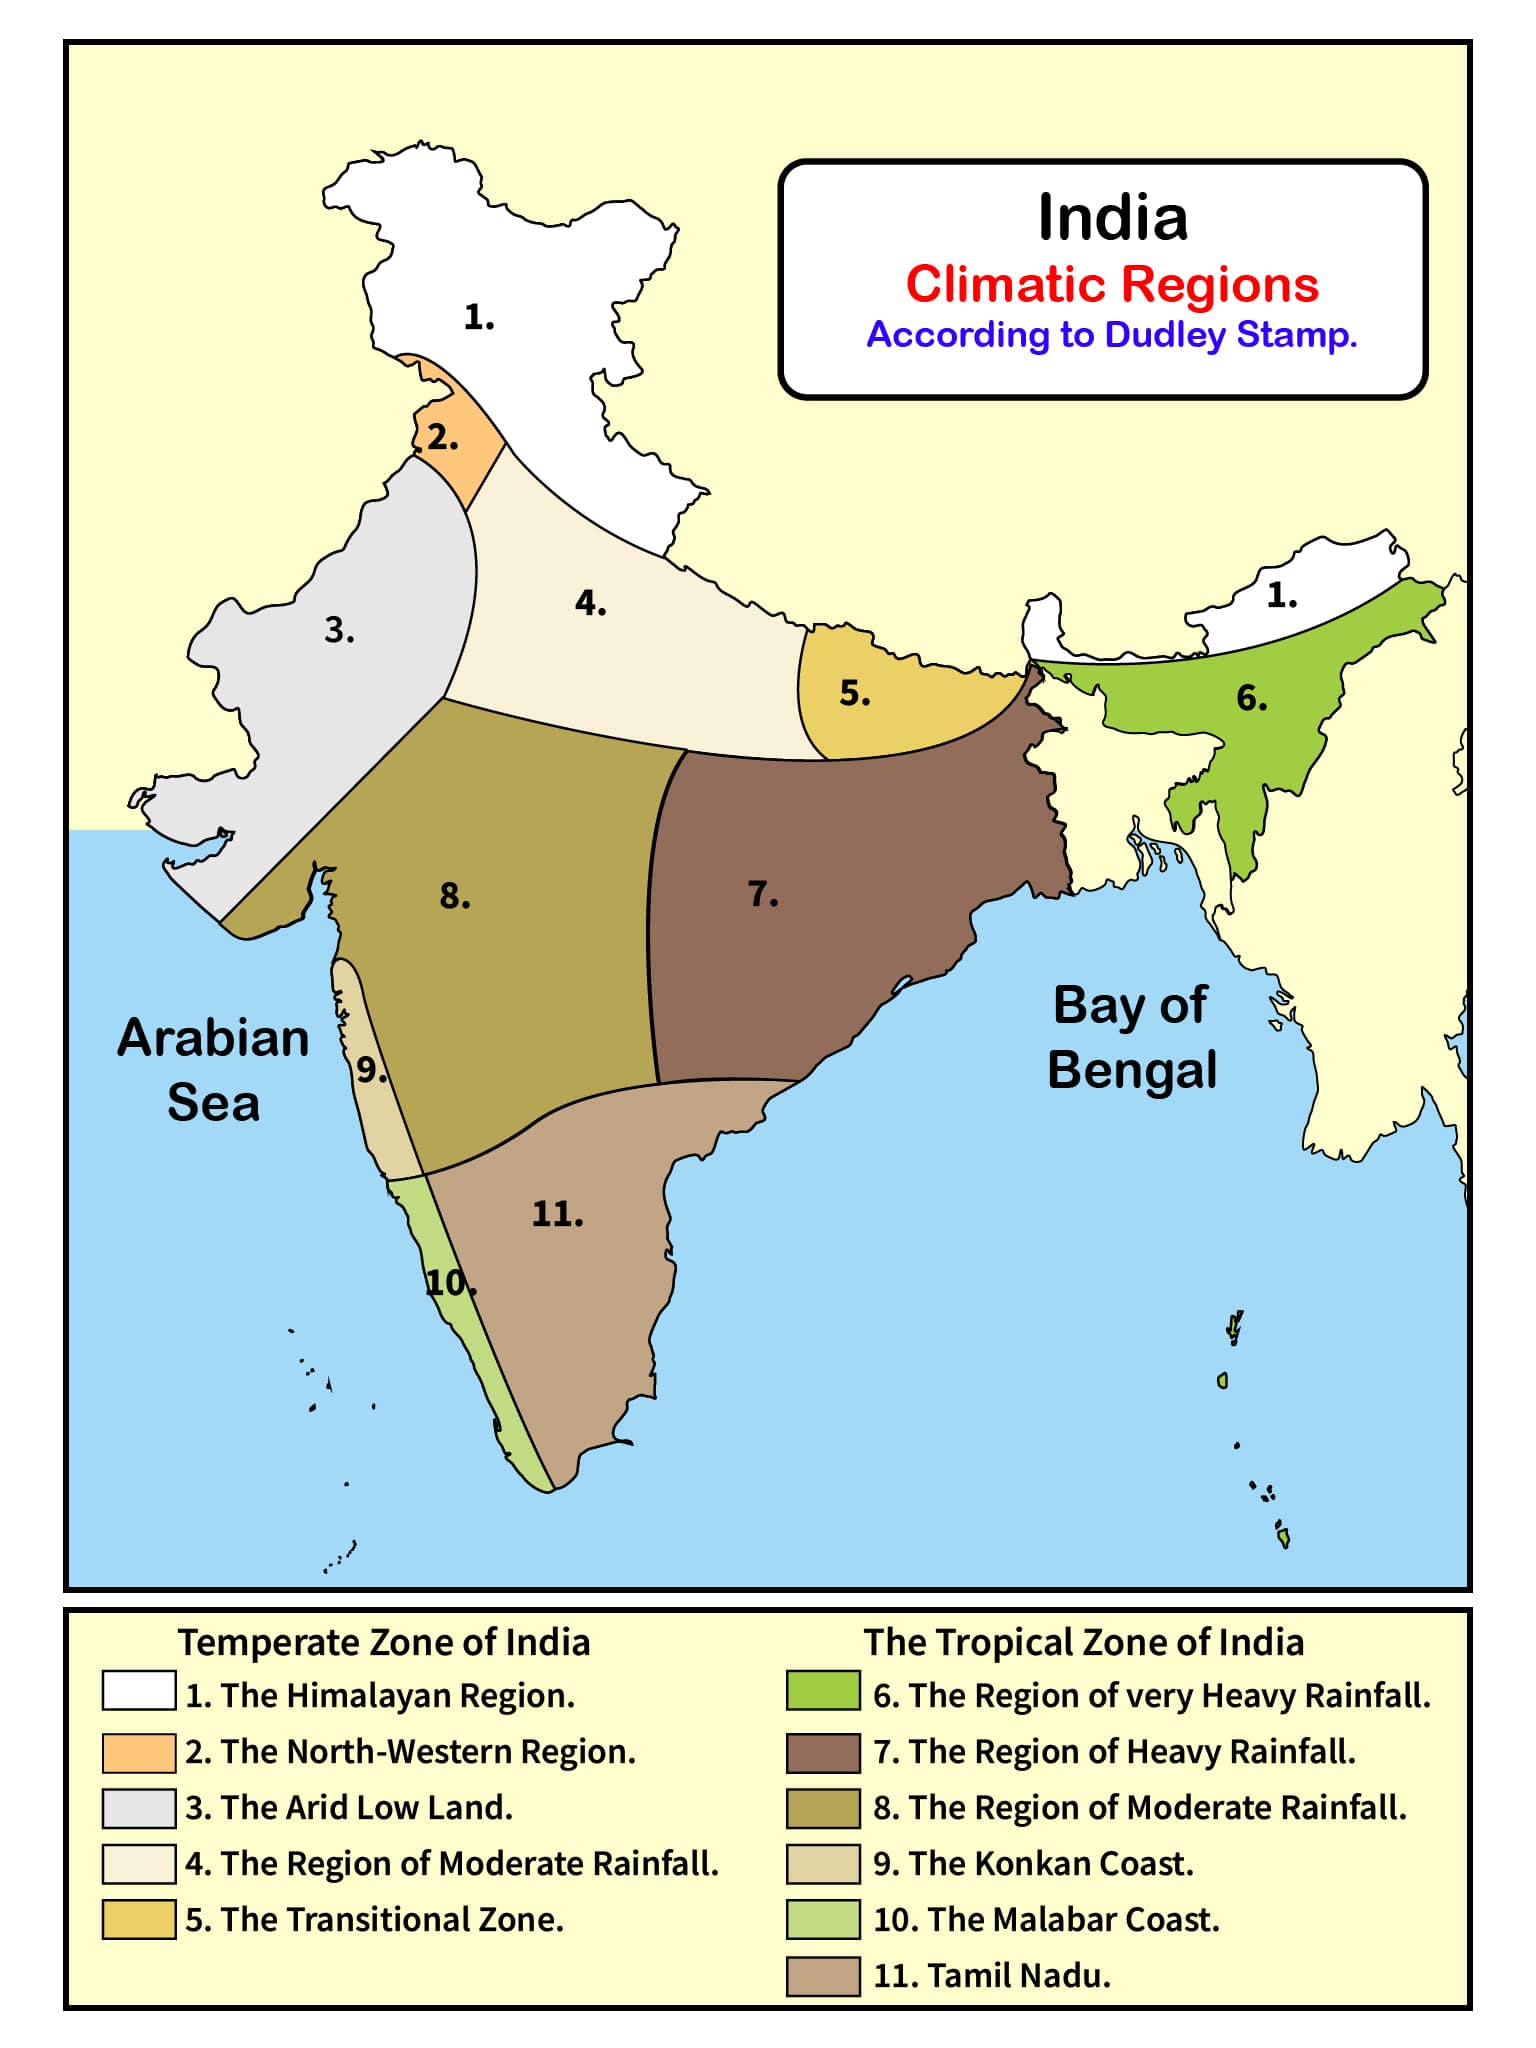 Climate Zones In India By Stamp 